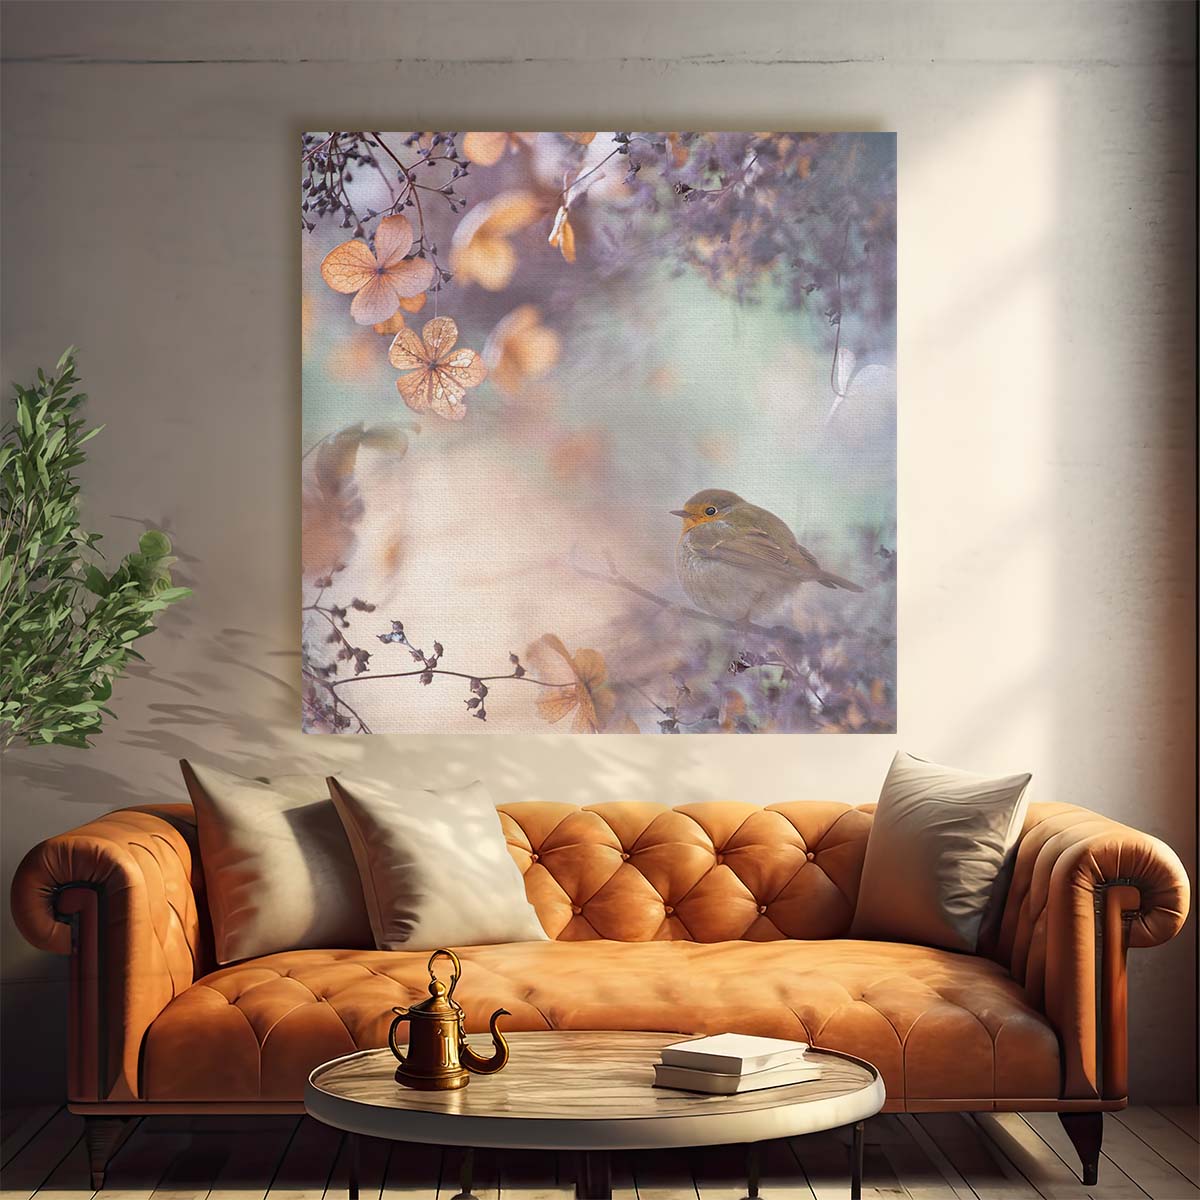 Dreamy Enchanted Winter Hydrangea & Robin Floral Photography Wall Art by Luxuriance Designs. Made in USA.